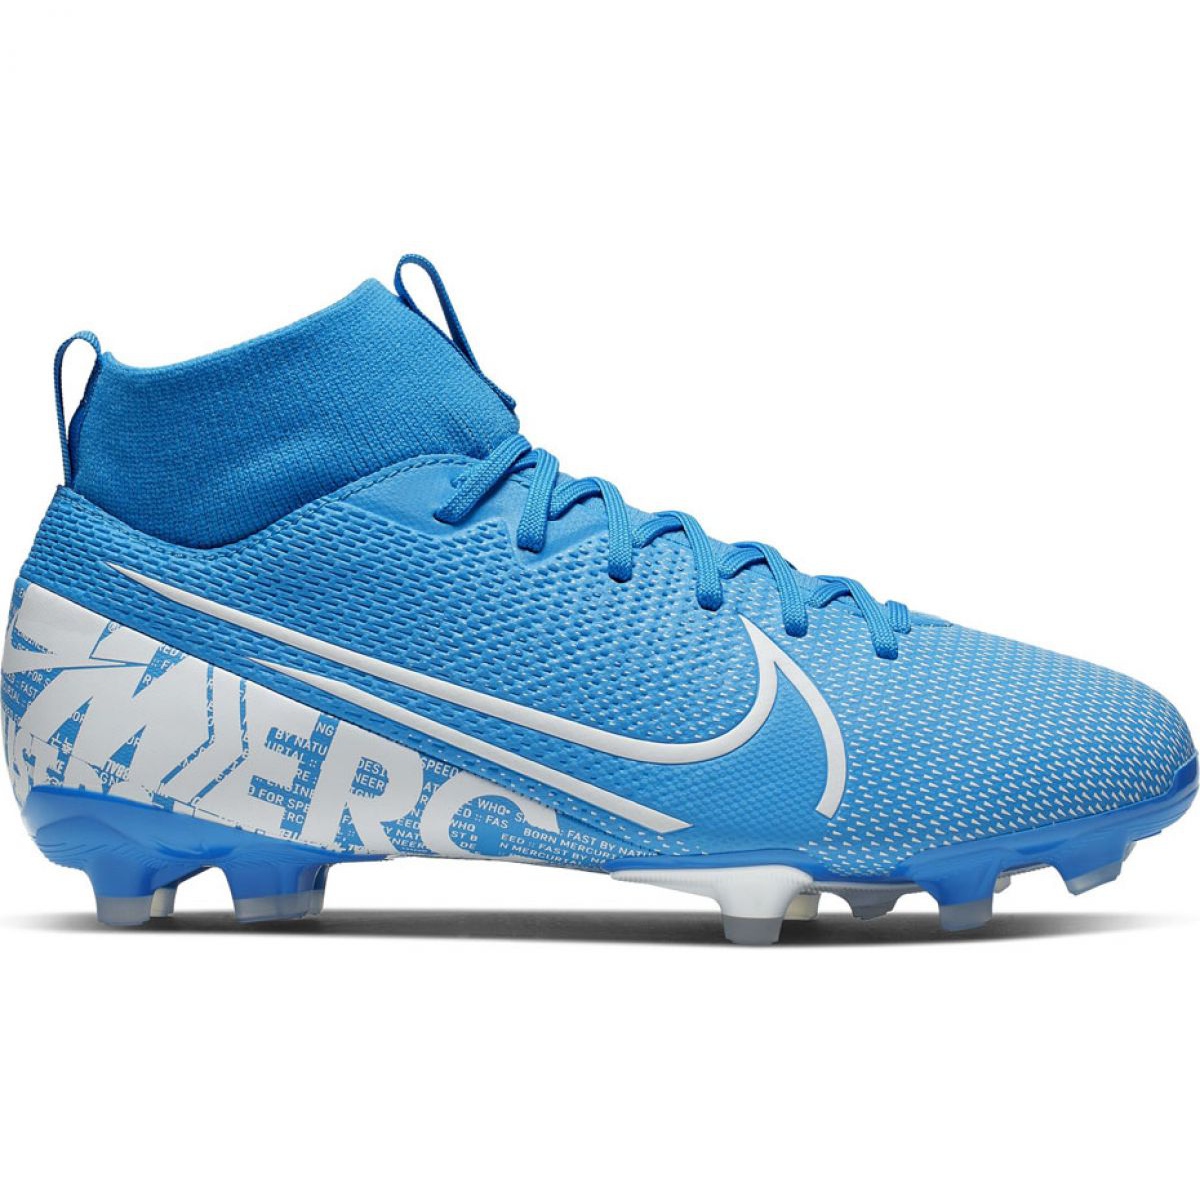 Mercurial Superfly 7 Academy / MG Jr 414 soccer shoes blue - KeeShoes